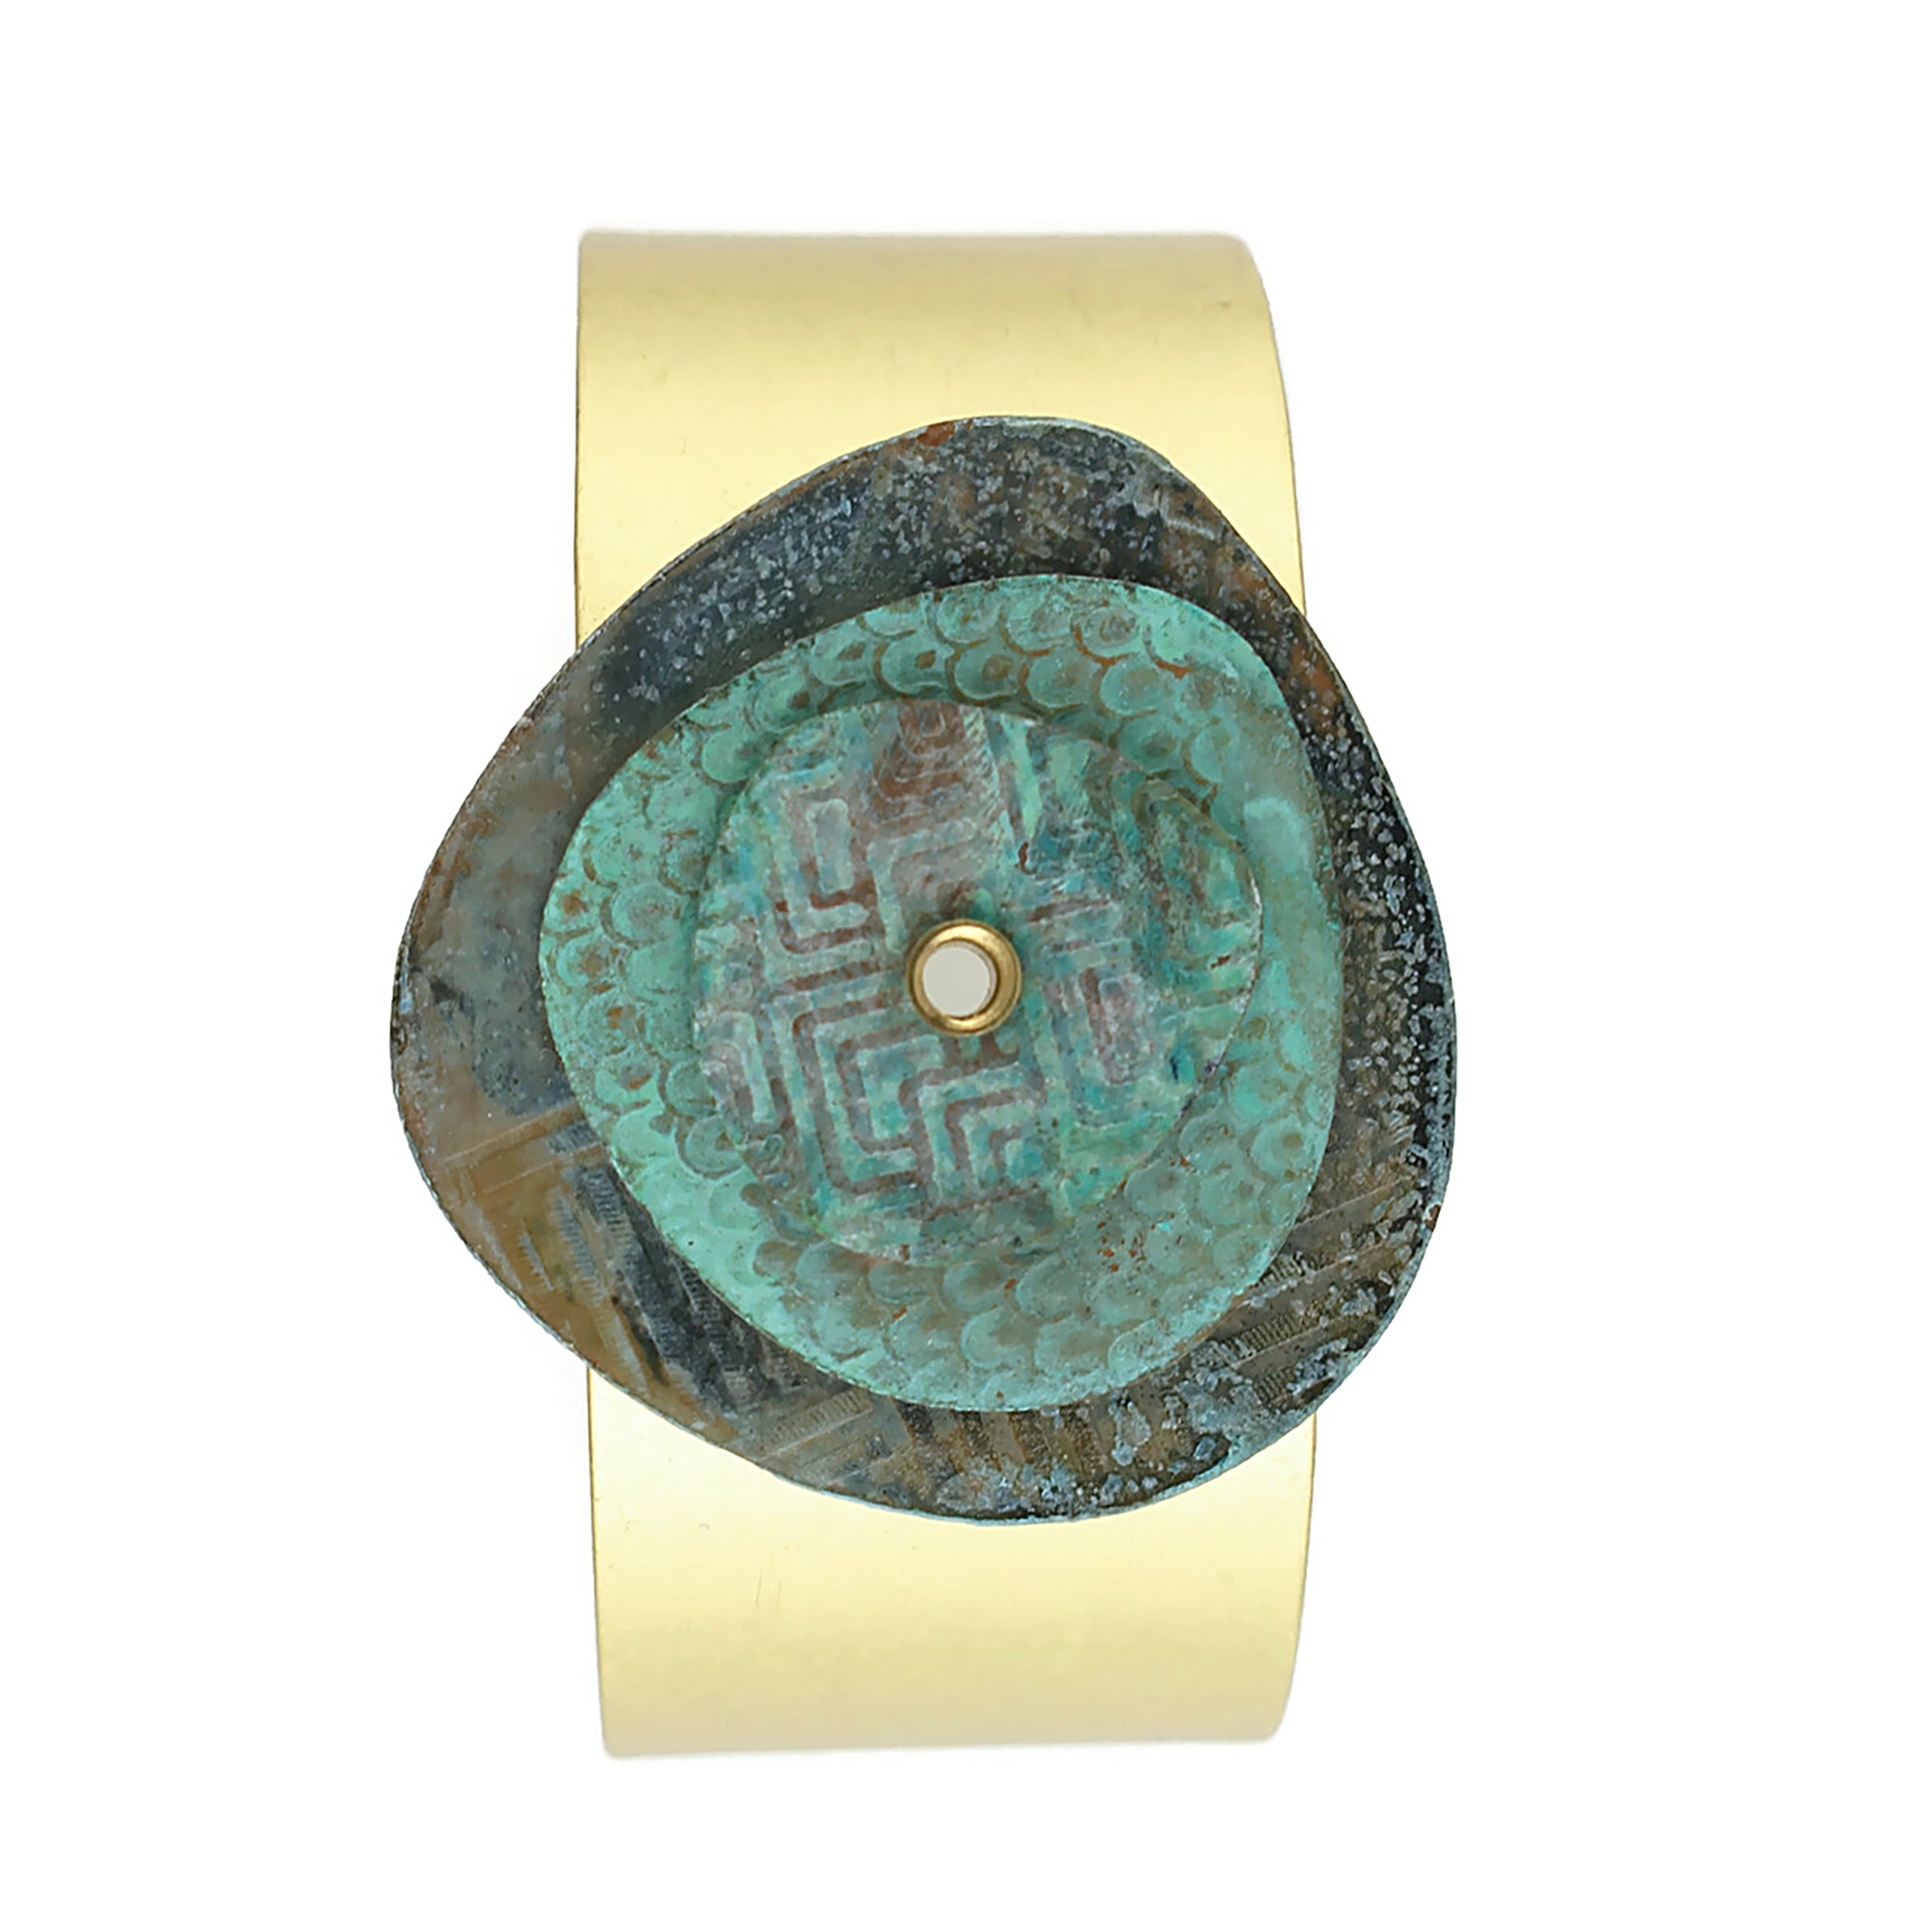 Patina Cuff: Iron Rustic Navy and Teal